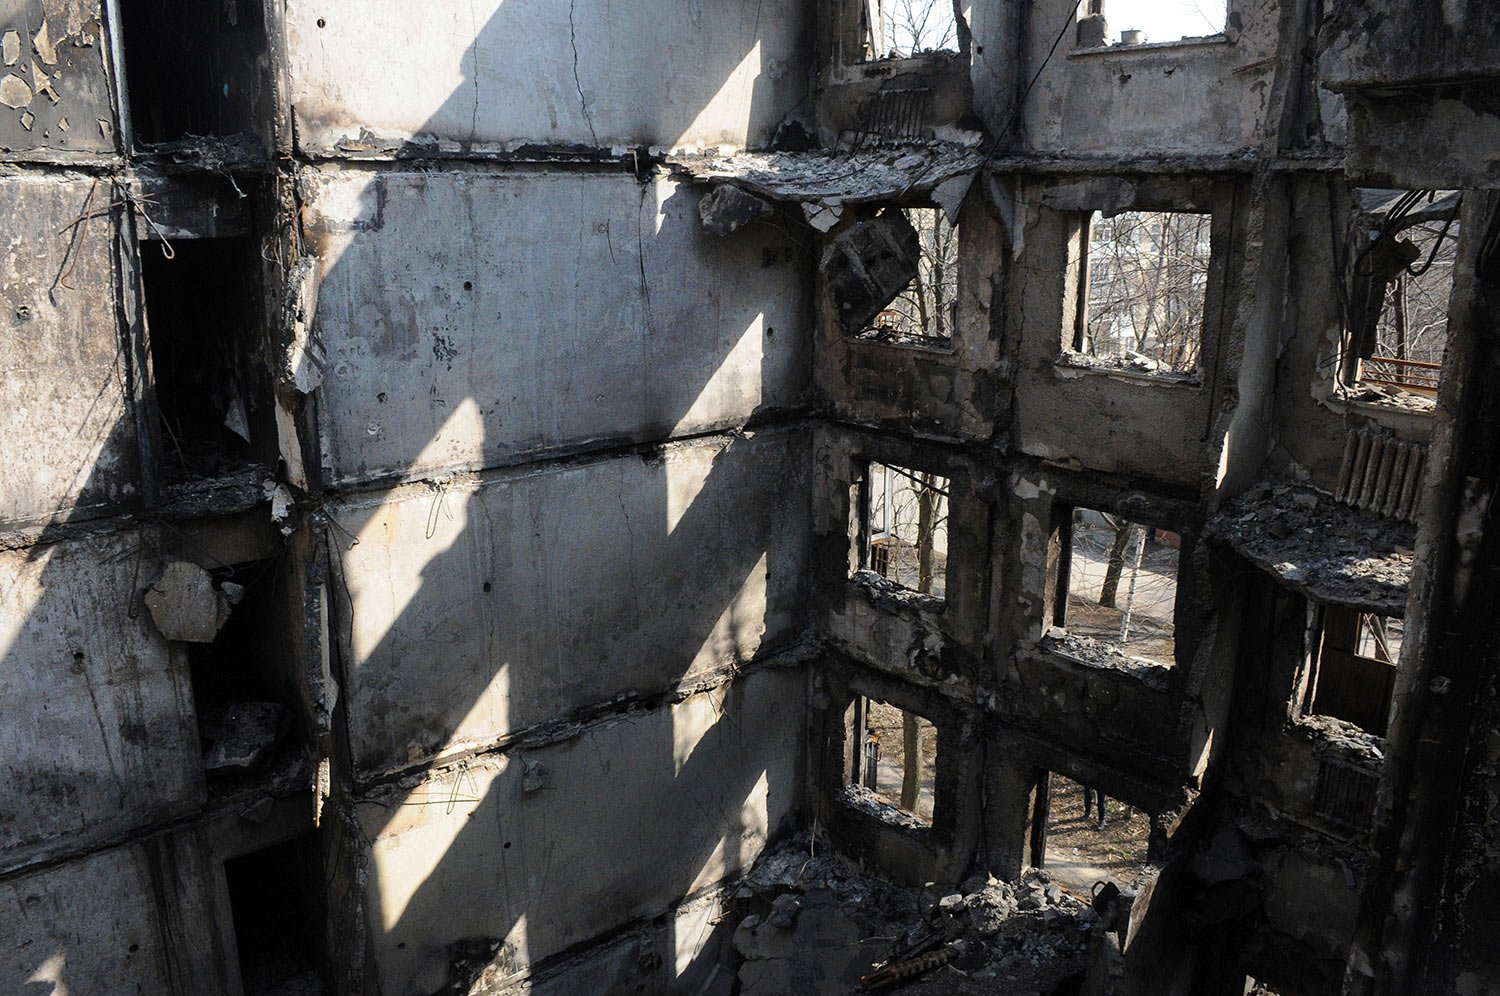  A view of an apartment building damaged by shelling in Kharkiv, Ukraine, Sunday, April 10, 2022. (AP Photo/Andrew Marienko) 